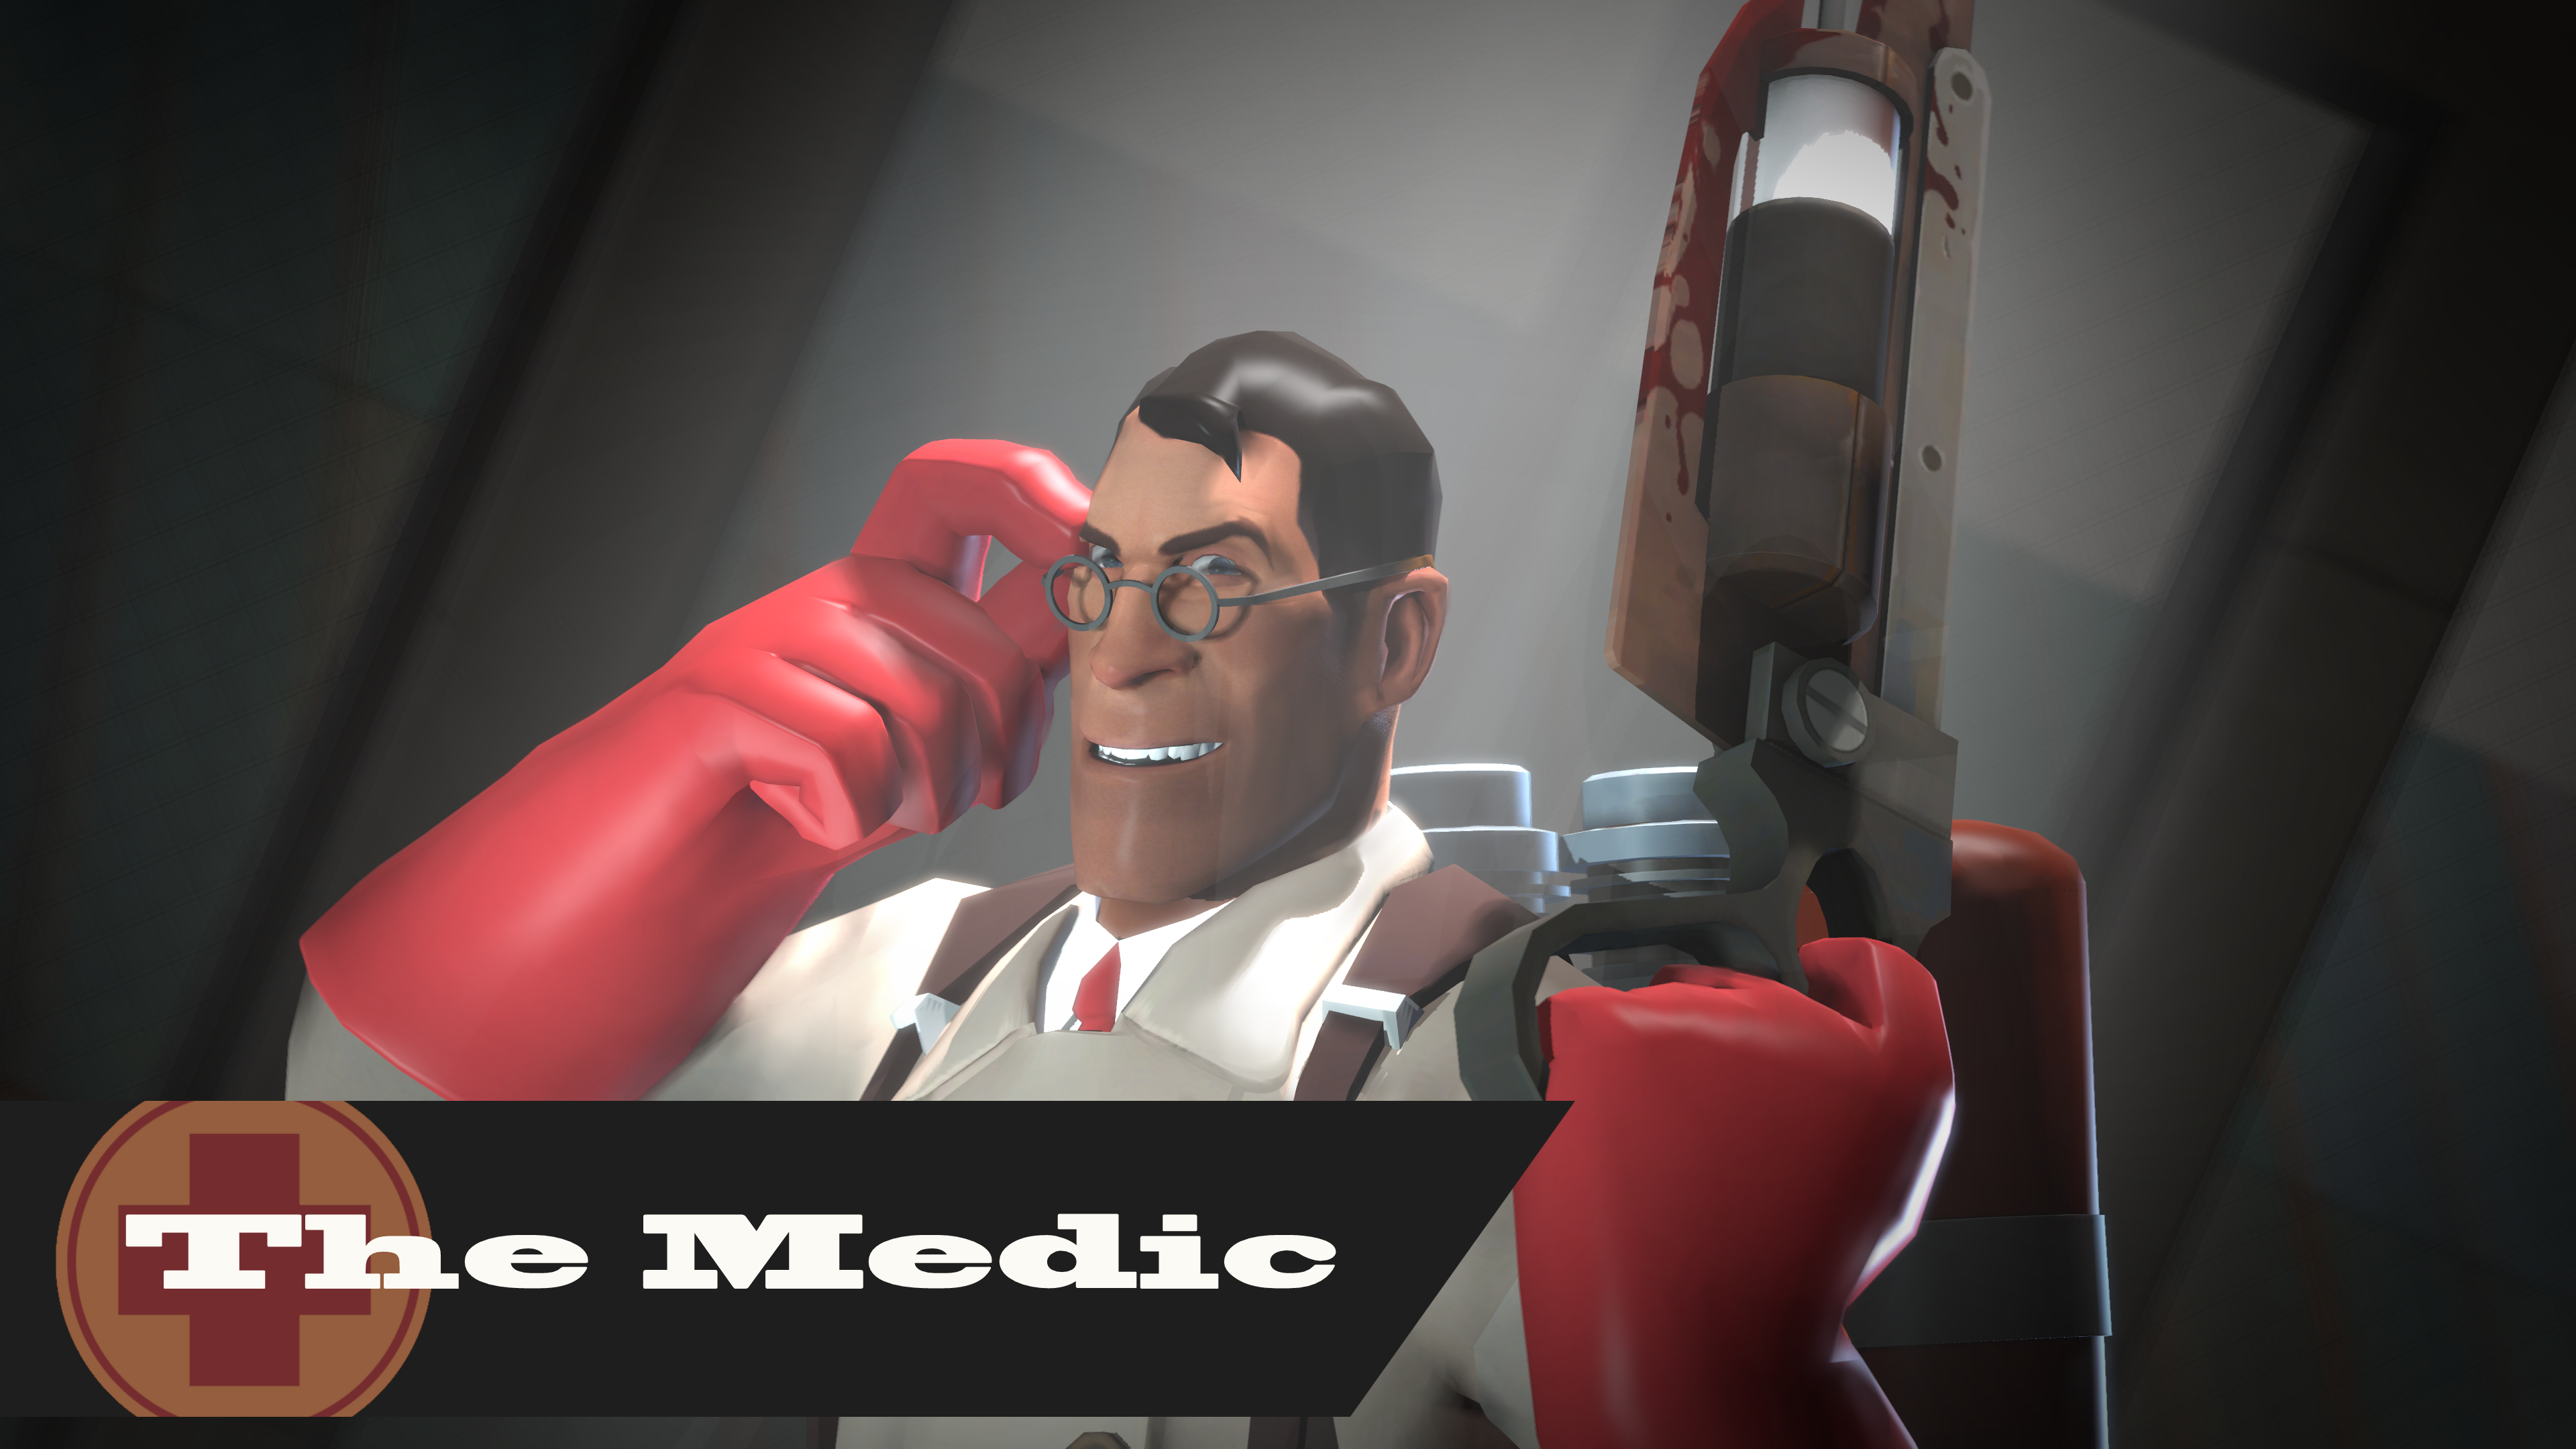 Finally Finished The Medic Wallpaper!